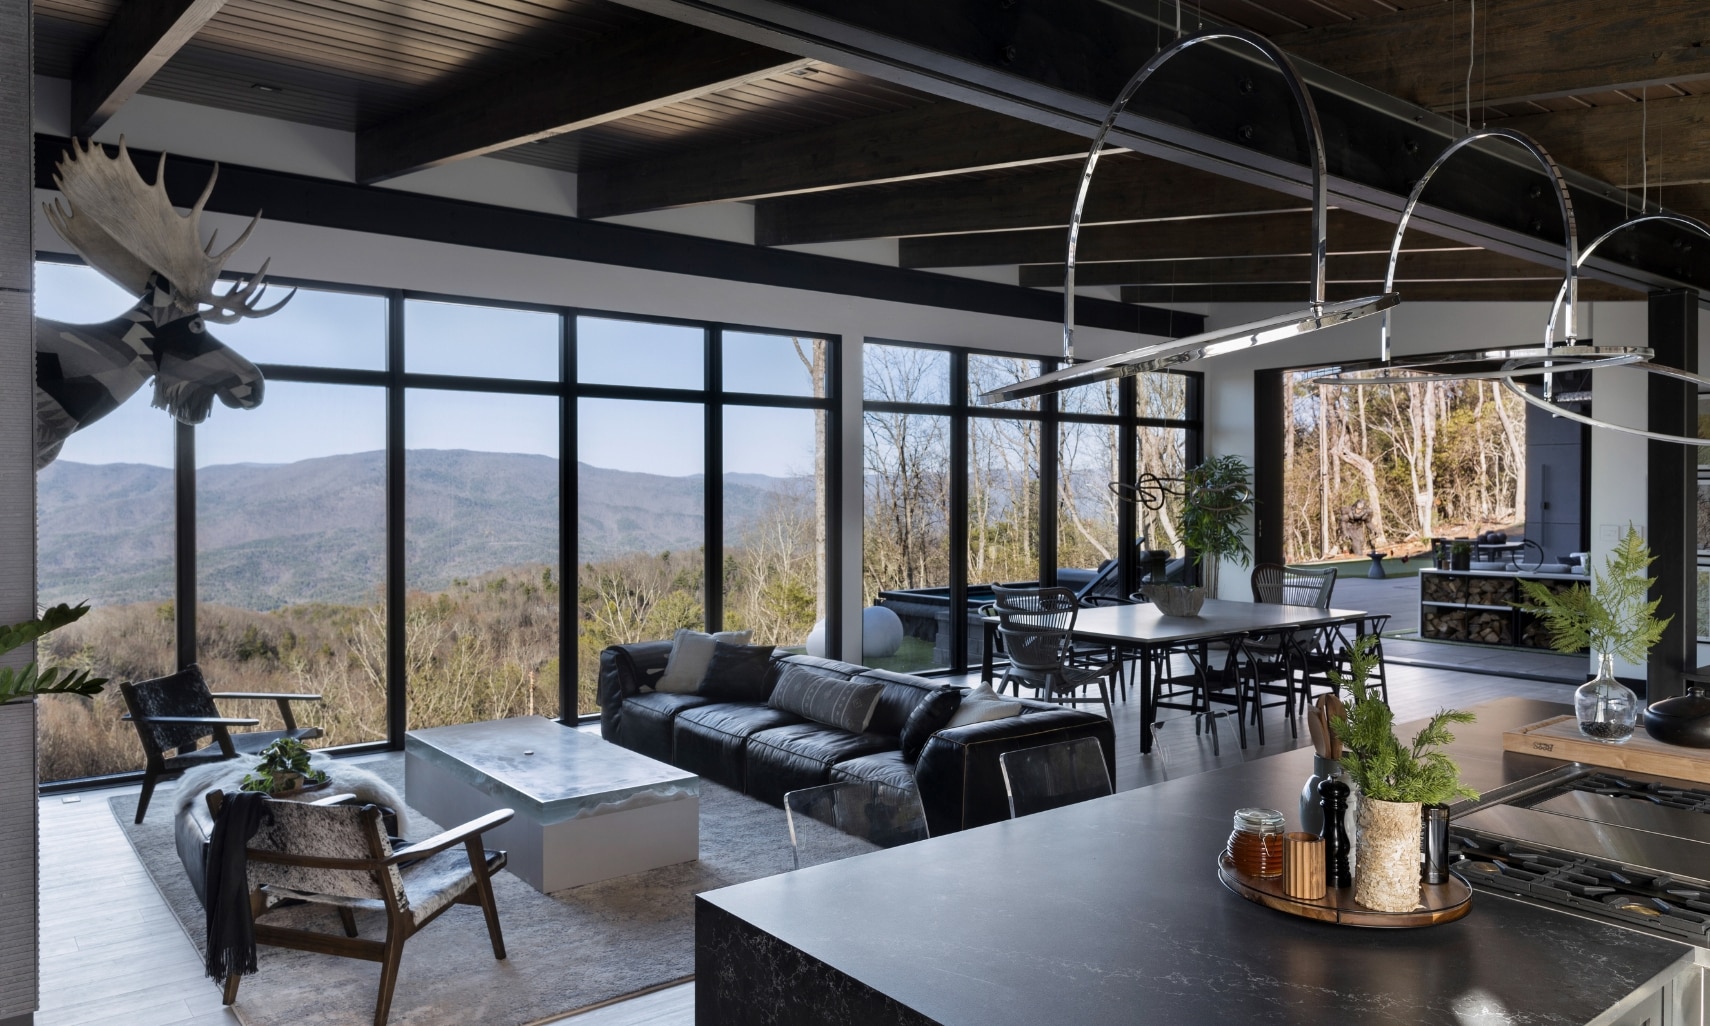 Chip Wade’s residential renovation, Pinhoti Peak, open kitchen, dining room, living room with black quartz countertops, and floor-to-ceiling windows.